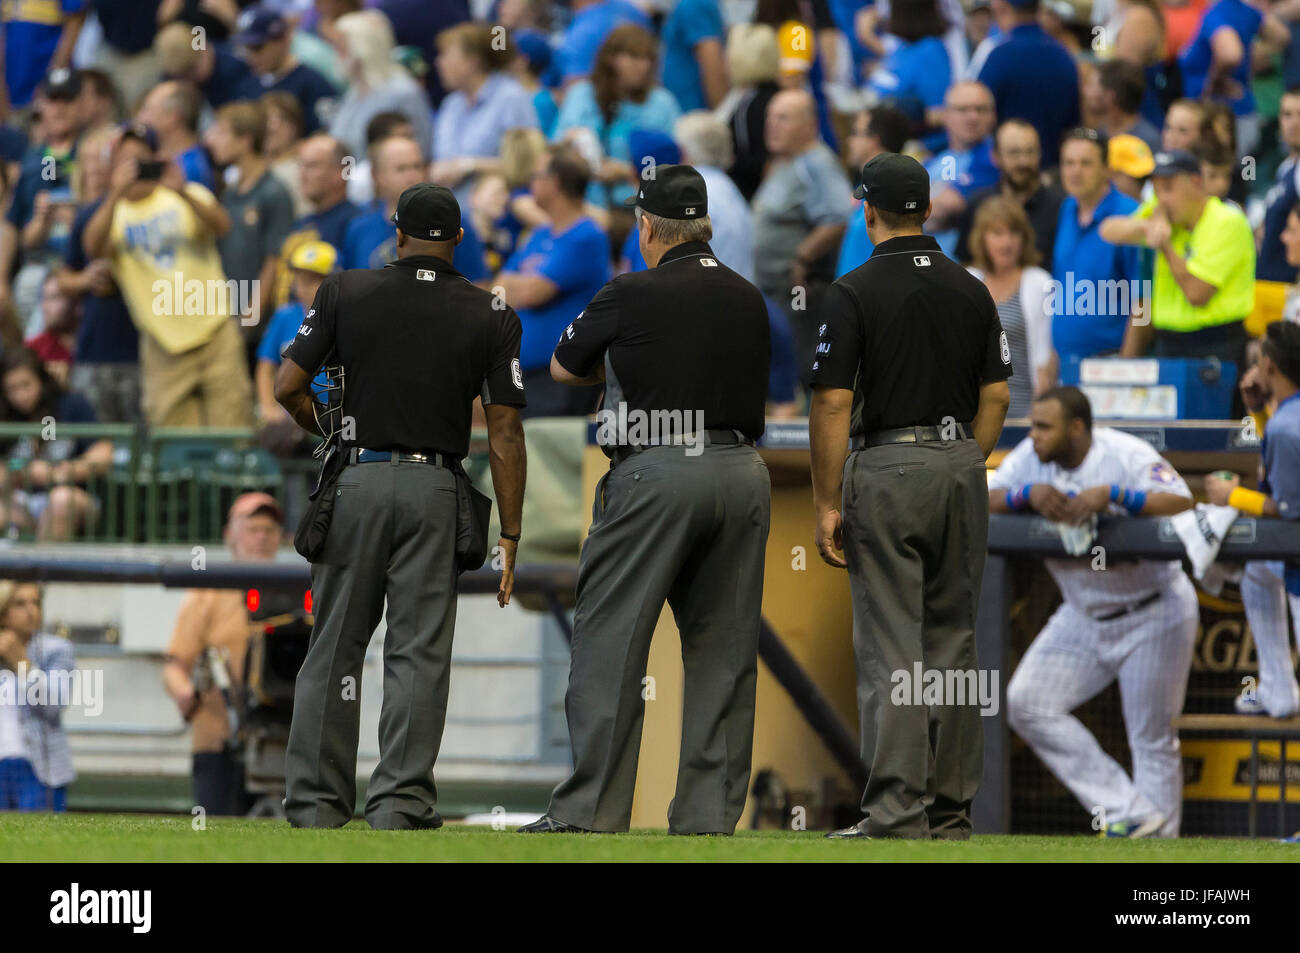 Milwaukee, WI, USA. 30th June, 2017. First base umpire Joe West #22 was hit in the head with a baseball thrown from the crowd in the Major League Baseball game between the Milwaukee Brewers and the Miami Marlins at Miller Park in Milwaukee, WI. John Fisher/CSM/Alamy Live News Stock Photo